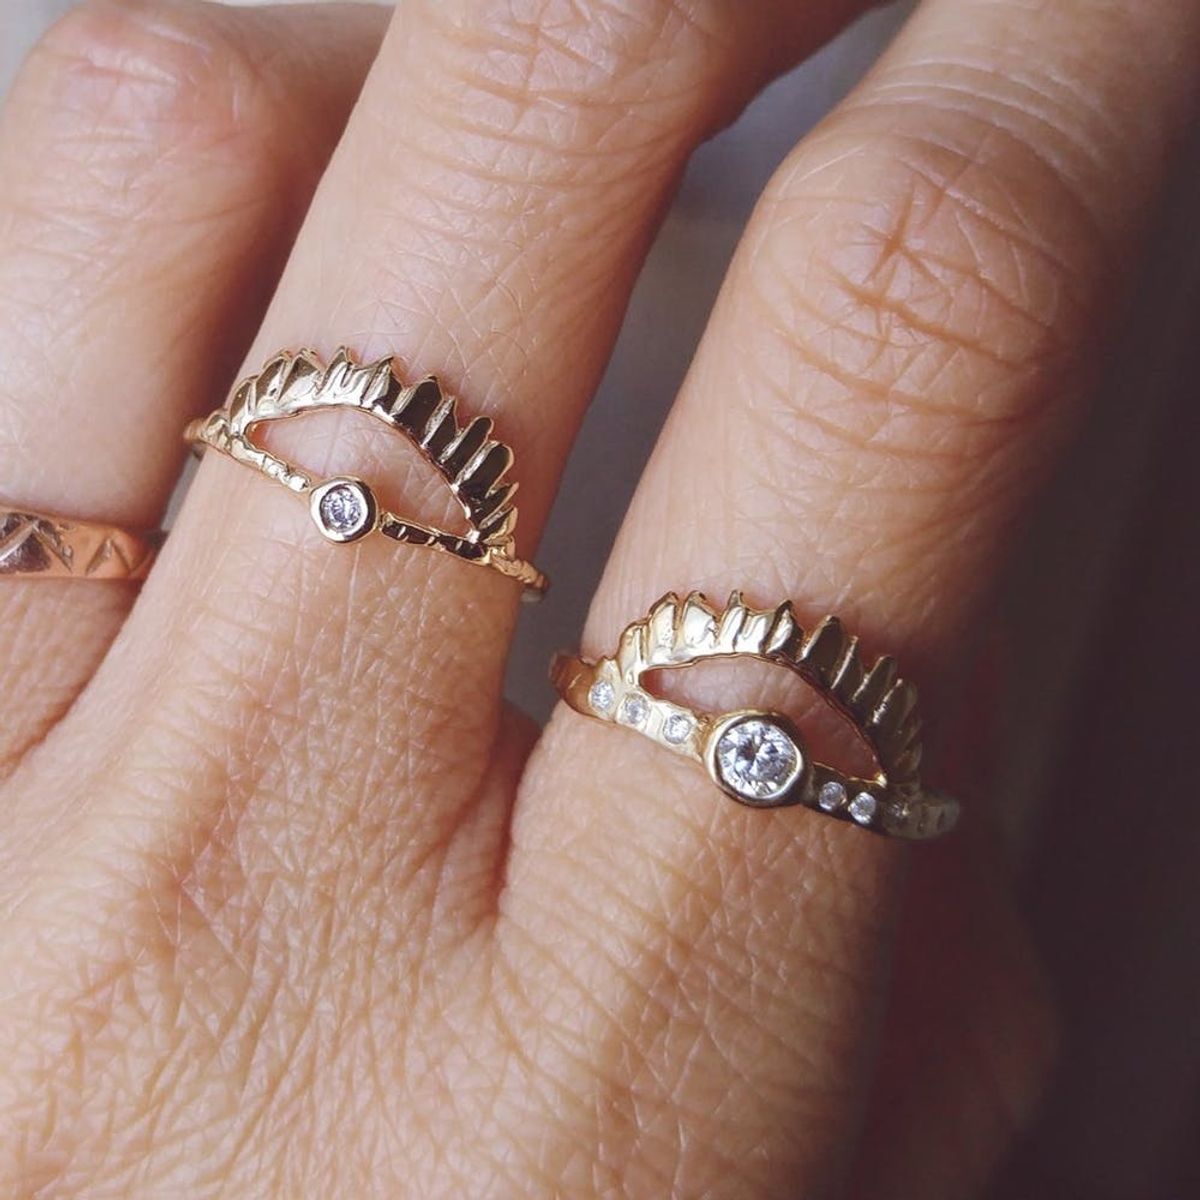 Swipe Right on This Seriously Cool Anti-Engagement Ring Trend